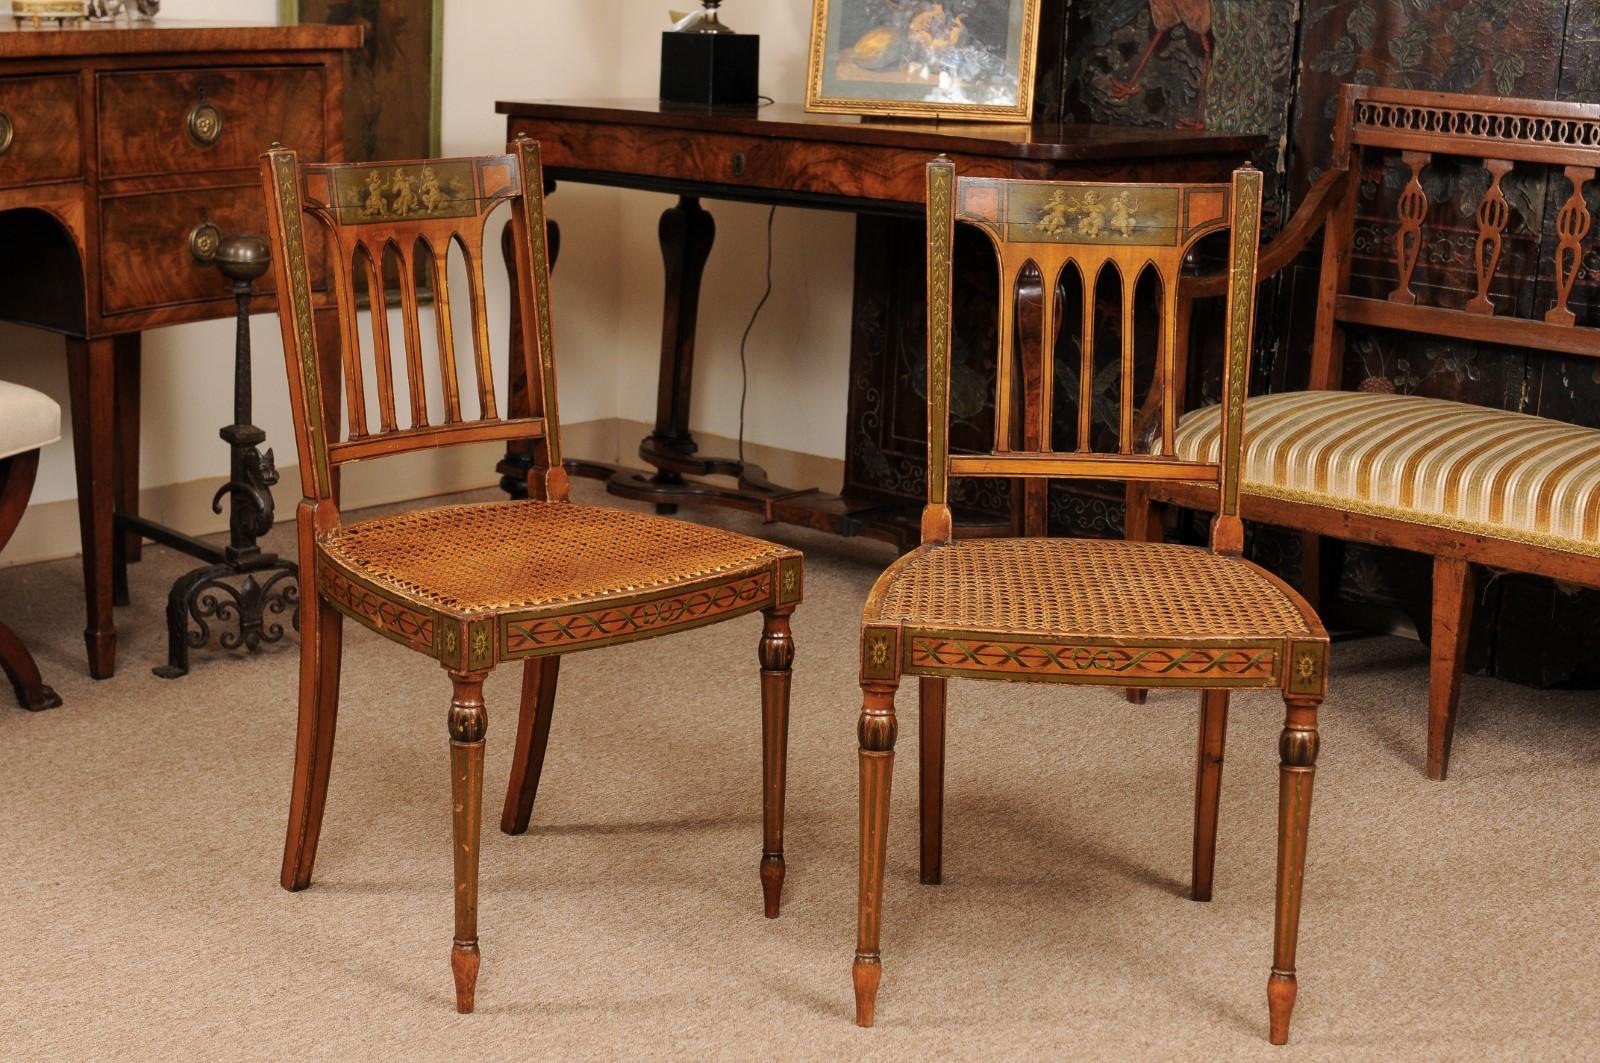 Pair of George III satinwood side chairs with Grisaille painted backsplats & cane seats, England ca. 1800.